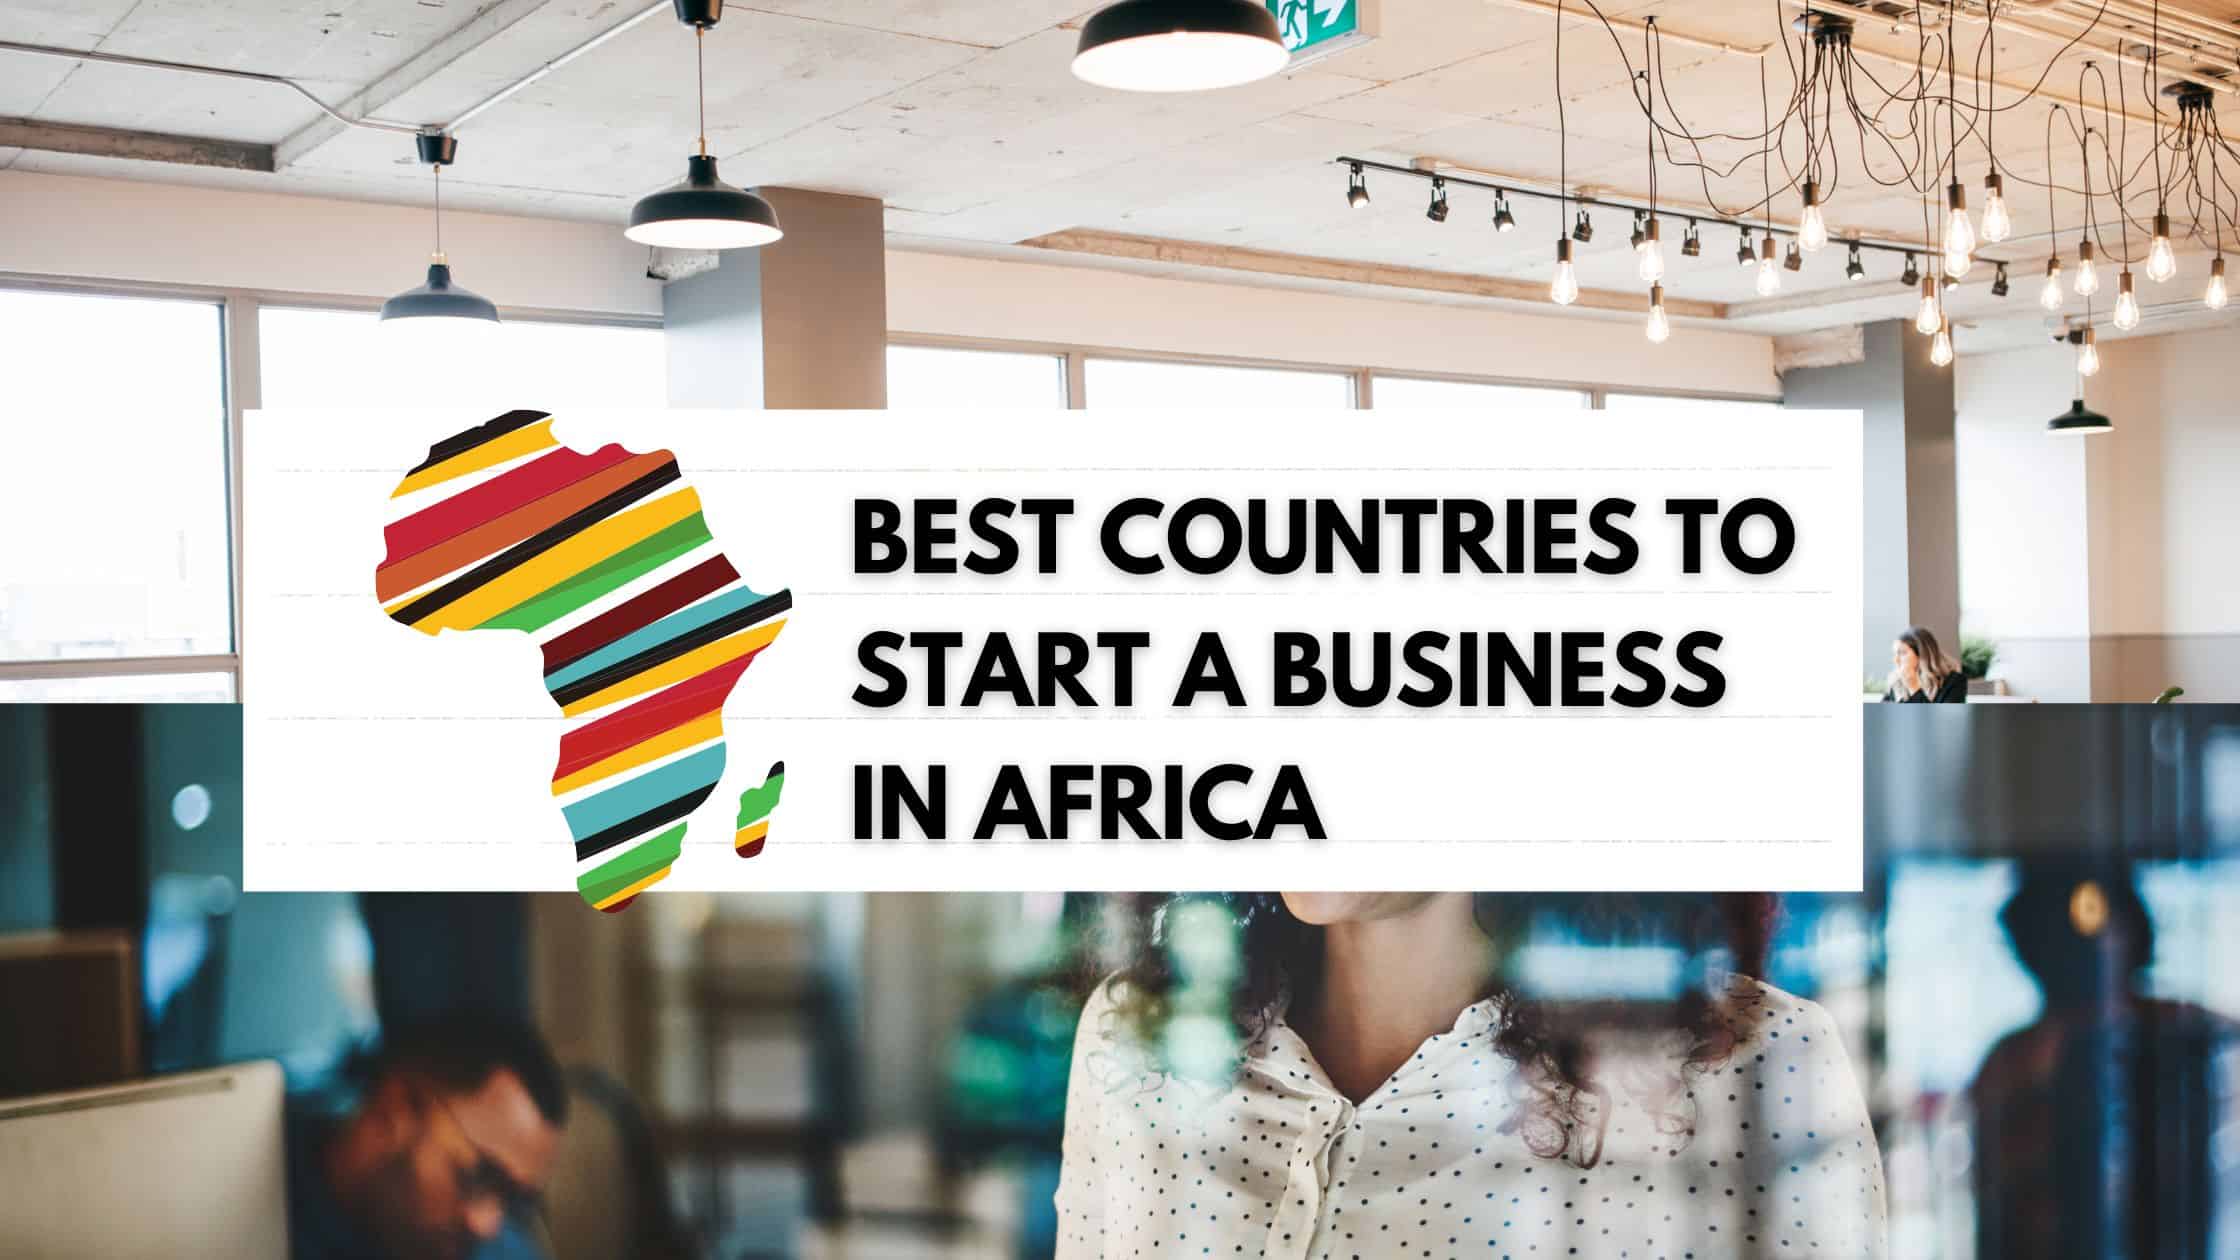 Best Countries to Start a Business in Africa